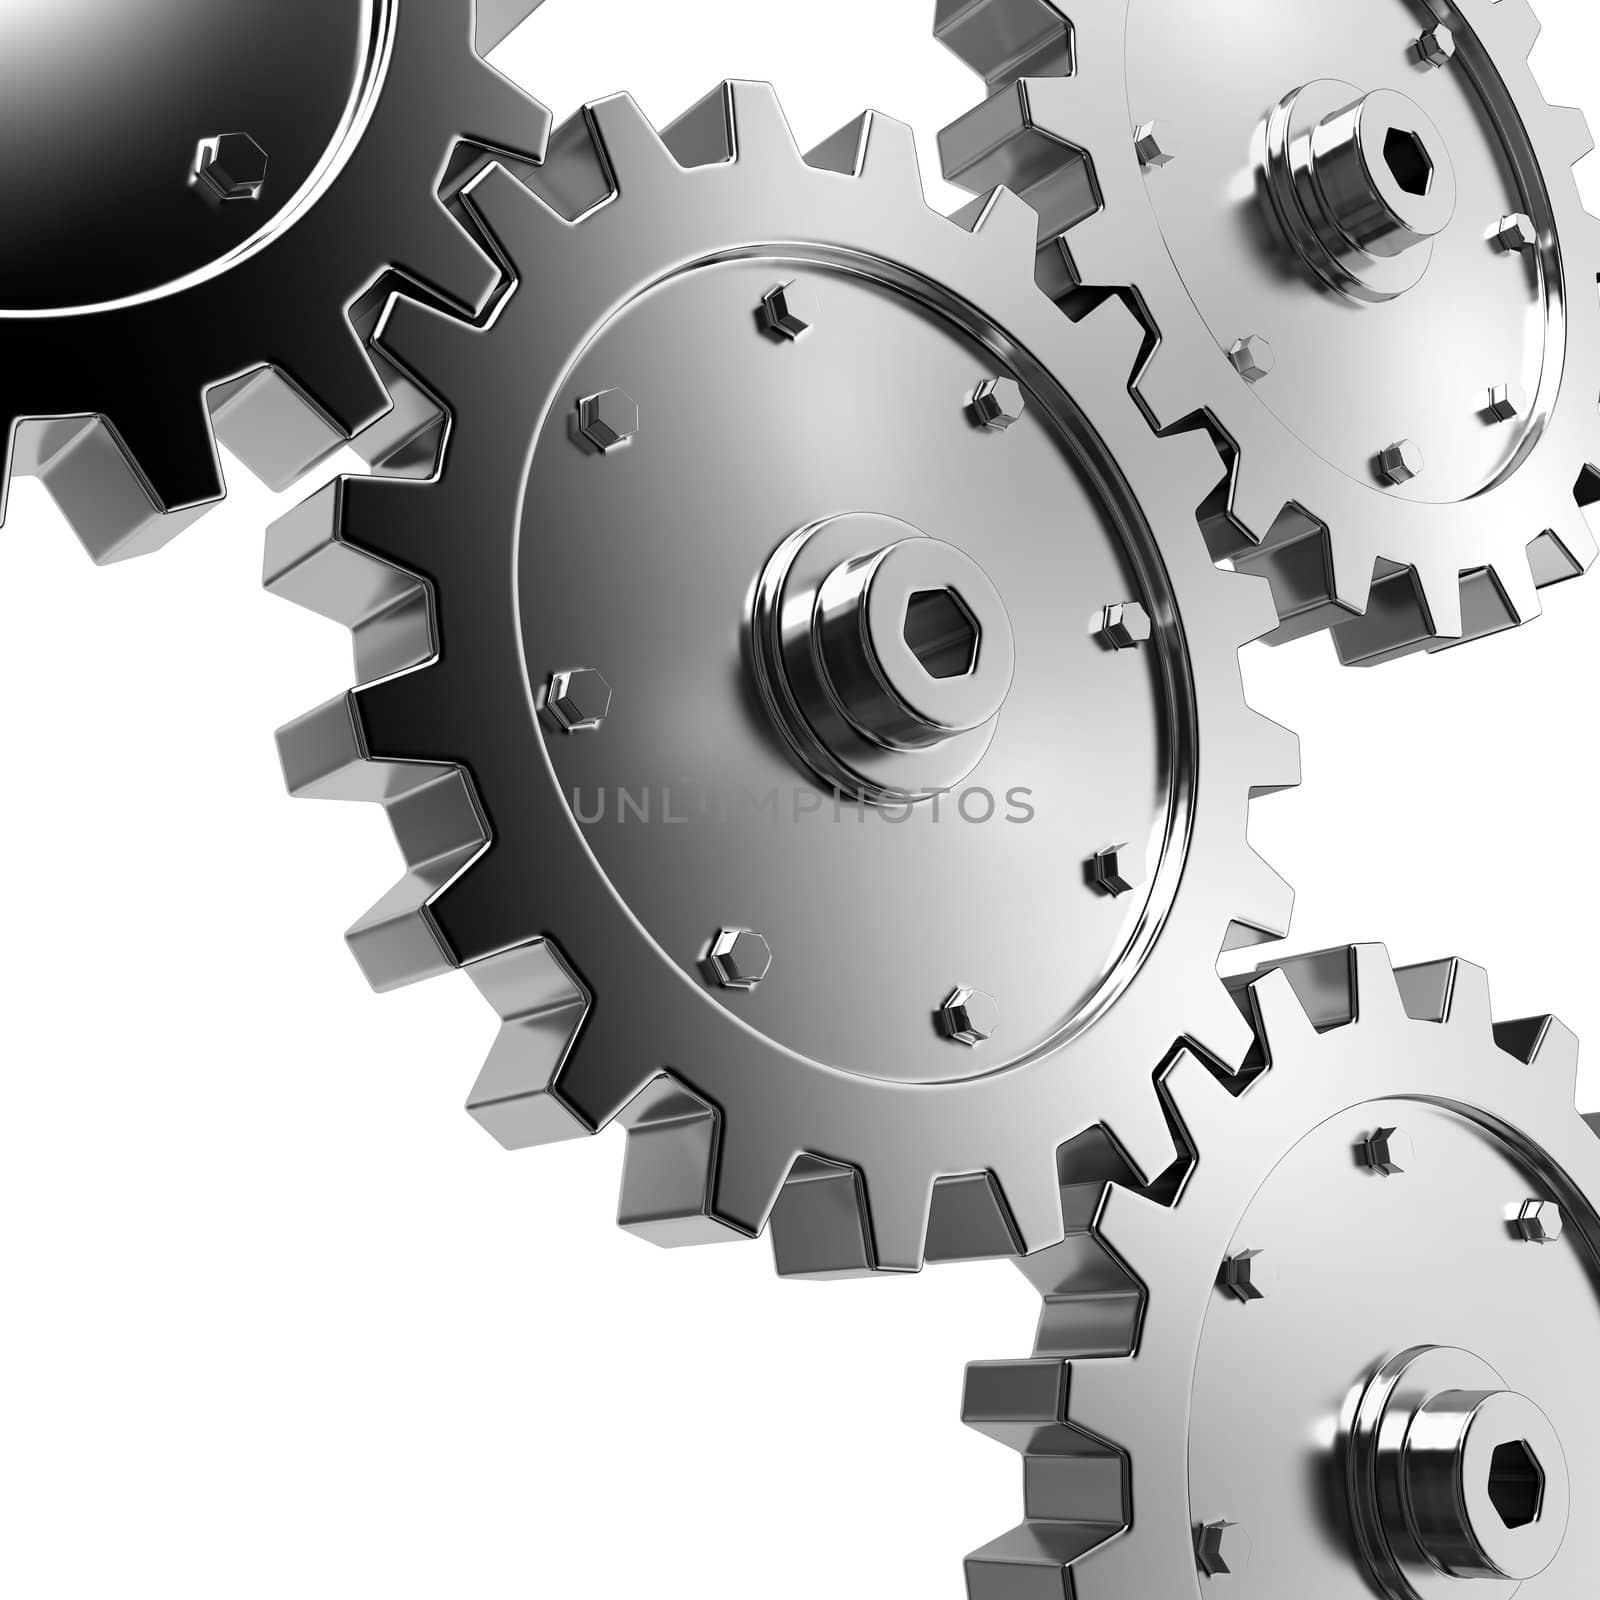 4 gears connected together. High resolution rendered.